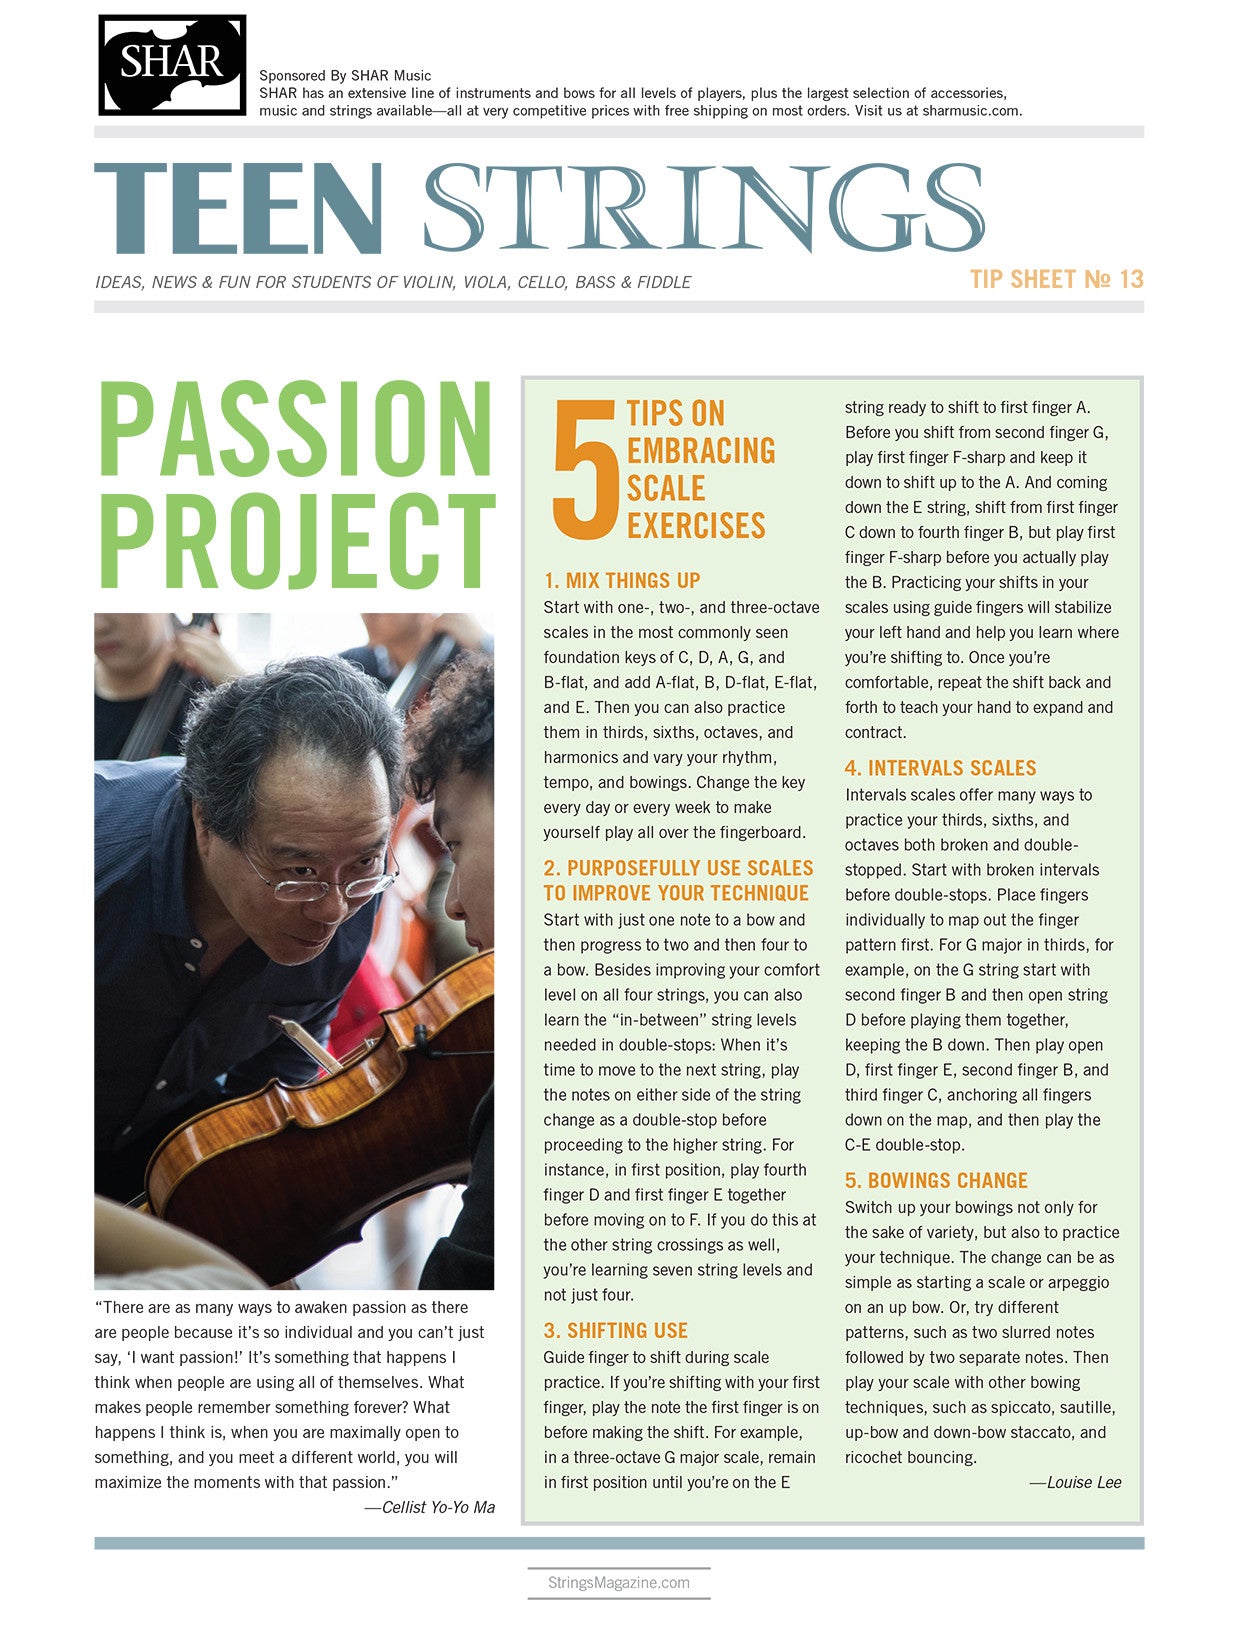 Teen Strings Tip Sheet #13: 5 Tips on Embracing Scale Exercises